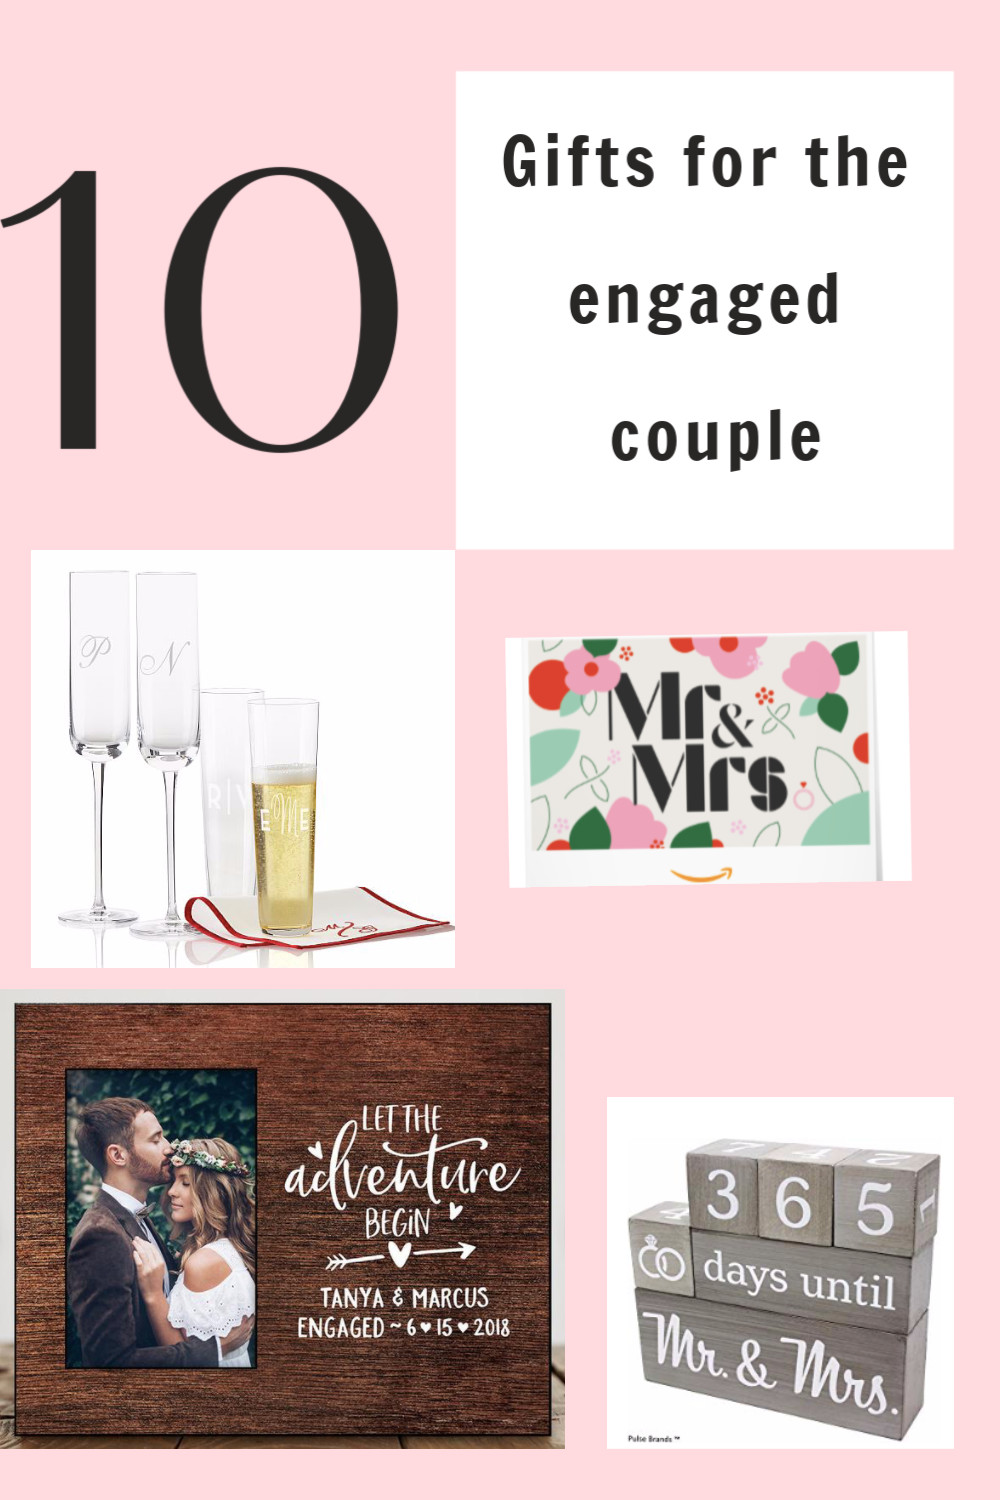 Gift Ideas For Engagement Couple
 10 Cute Gift Ideas for the Engaged Couple